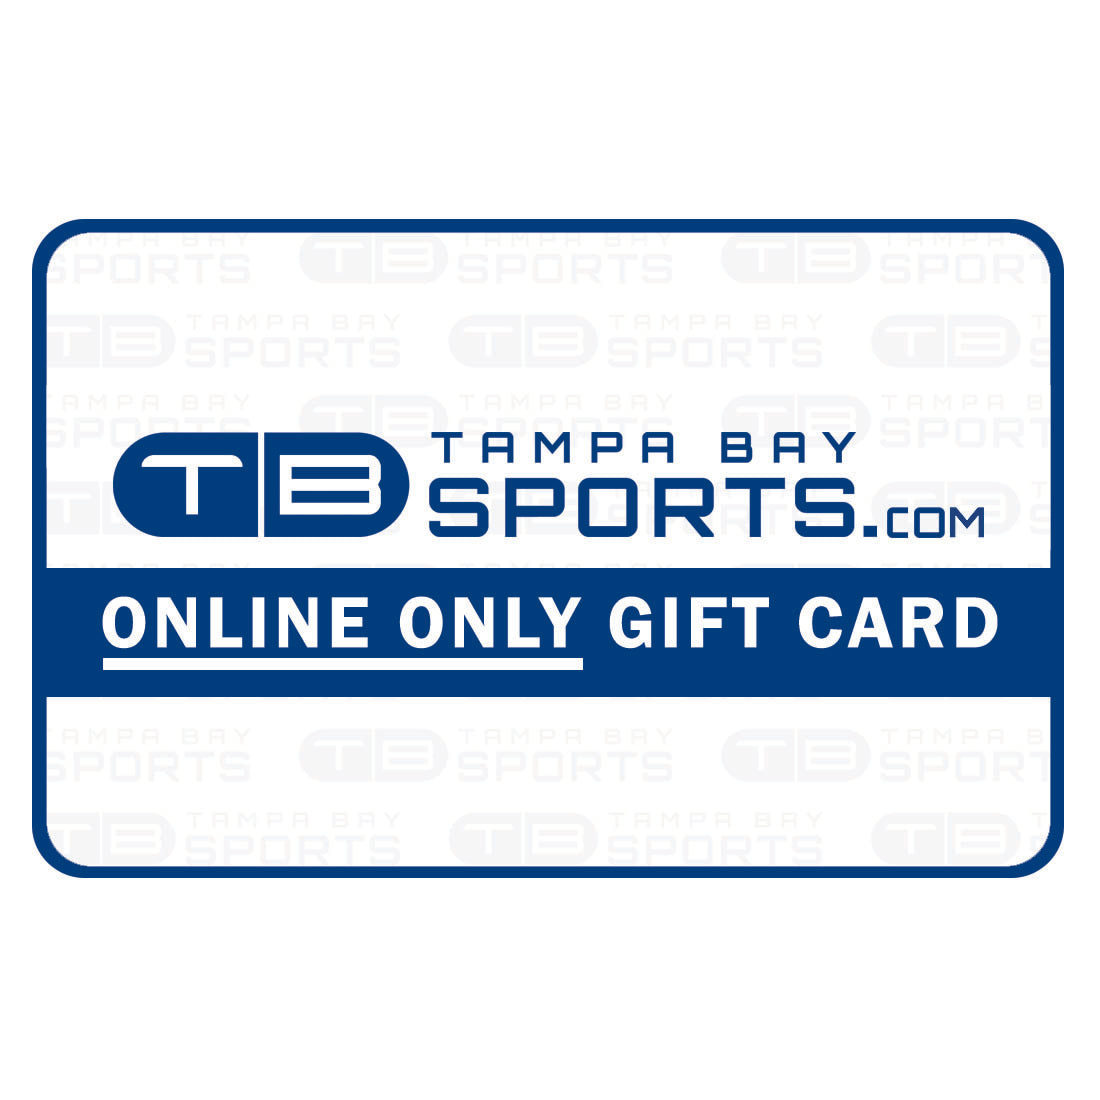 TampaBaySports.com ONLINE ONLY Gift Card